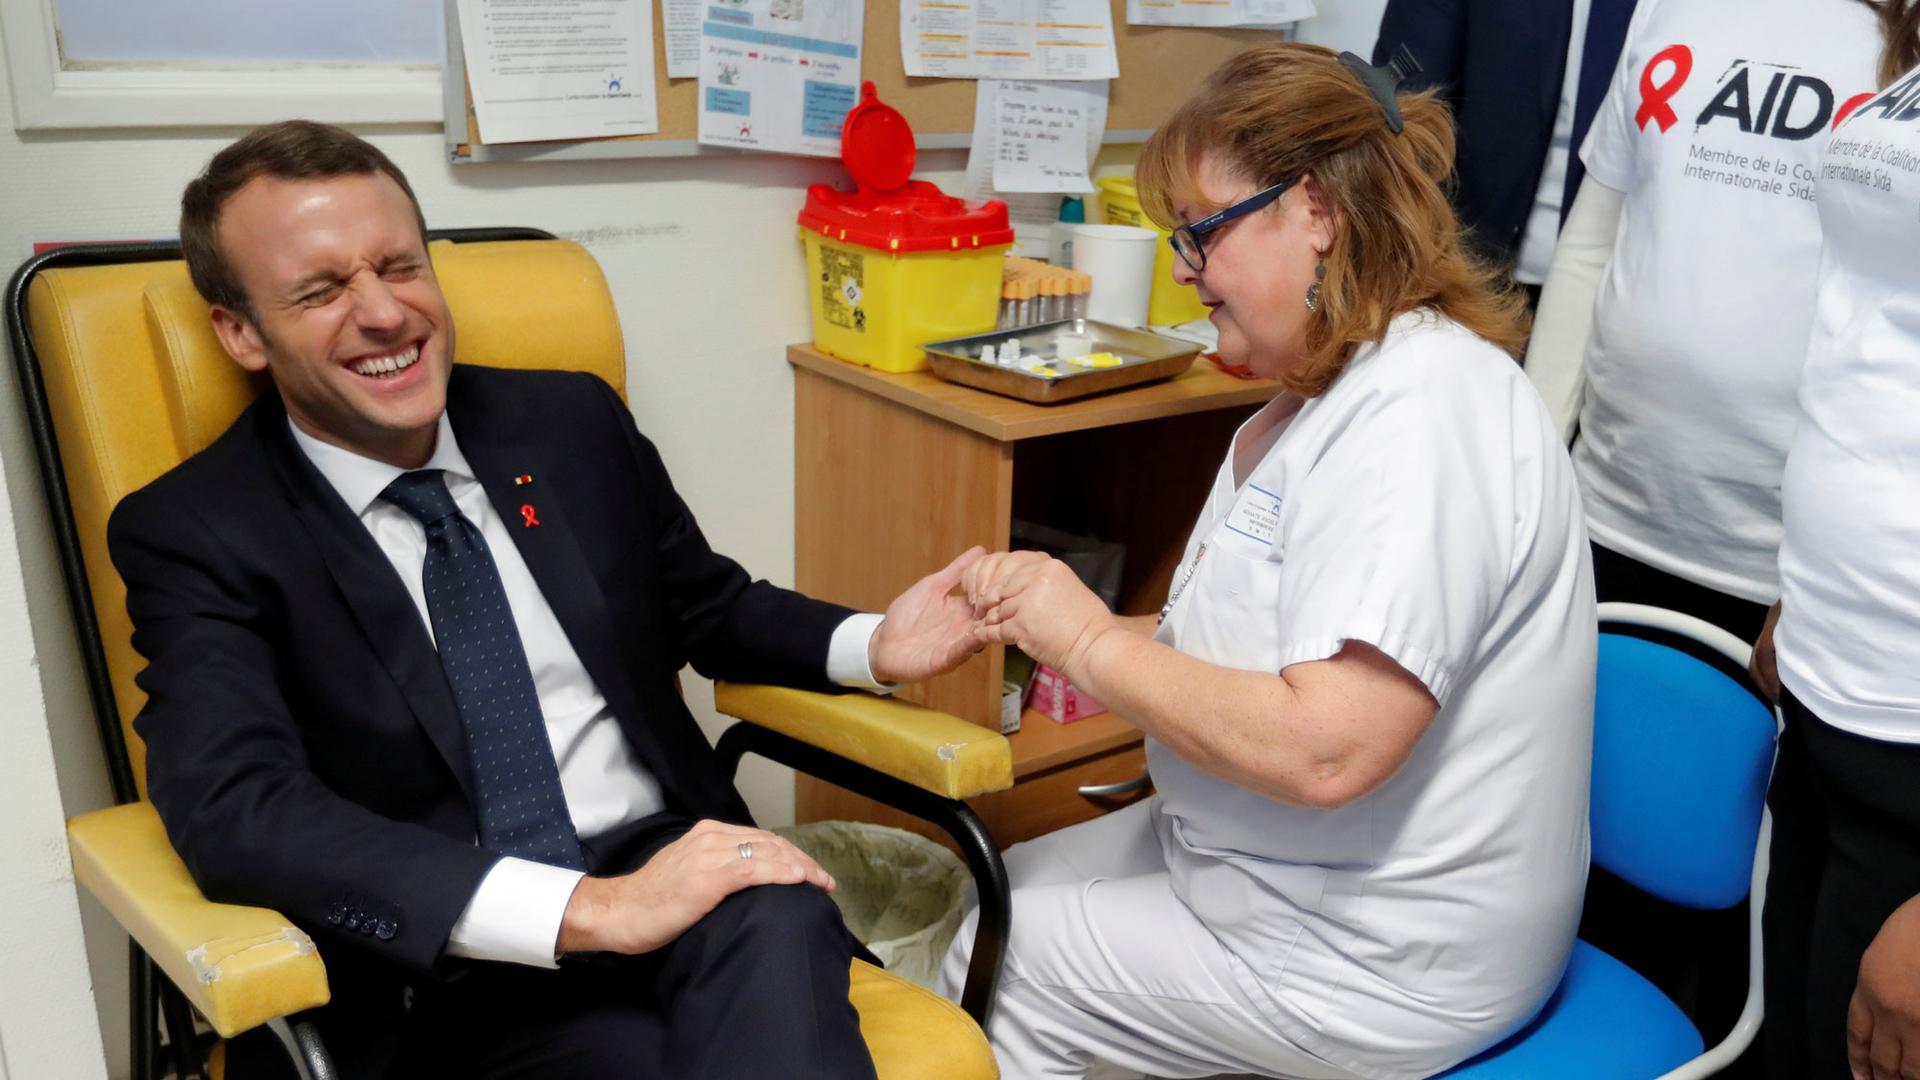 A nurse is shown taking blood for a HIV test from French President Emmanuel Macron who is sitting in a yellow chair cringing.